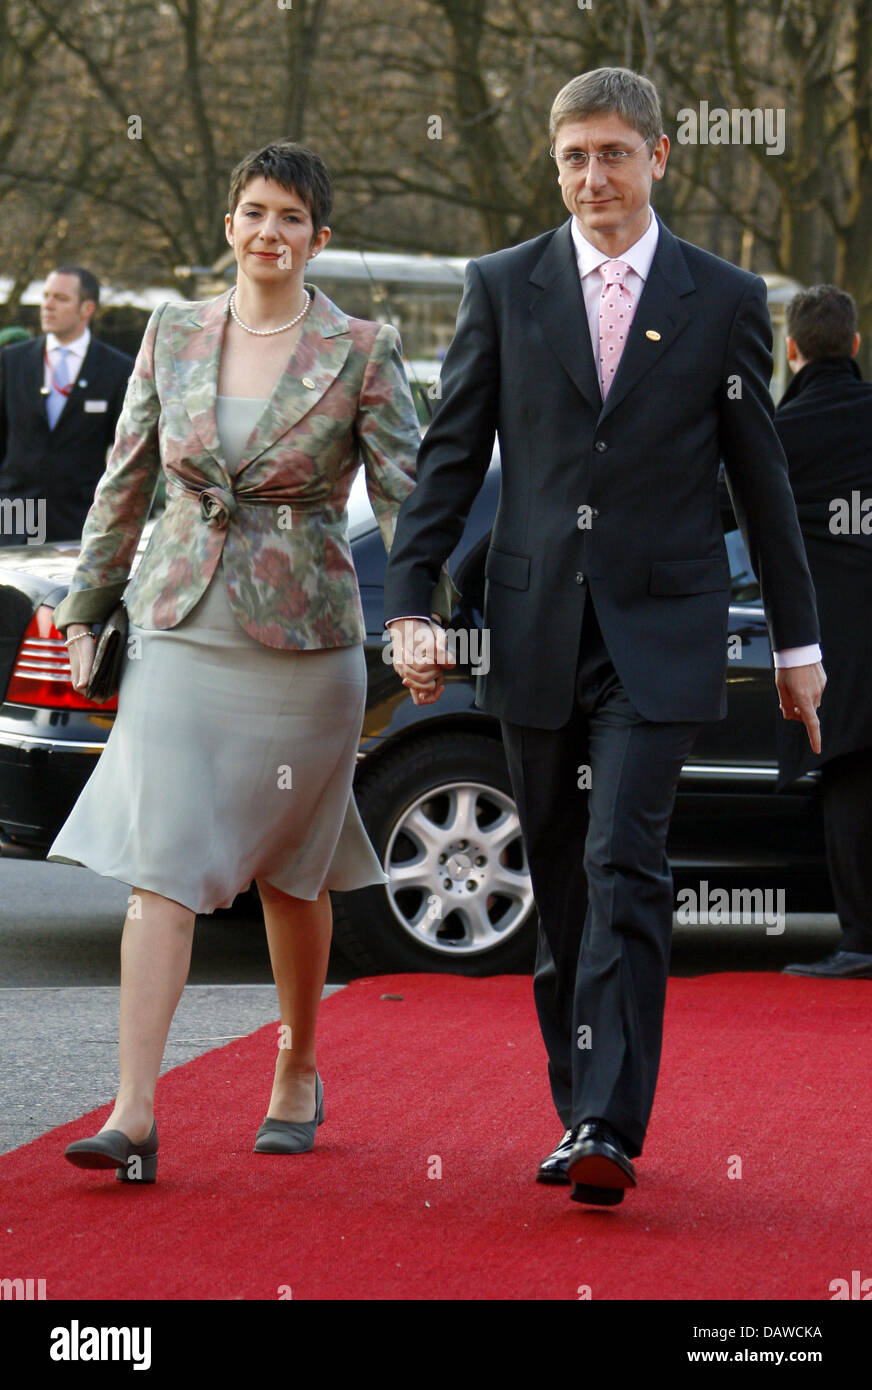 Hungarian Prime Minister Ferenc Gyurcsany and his wife Klara Dobrev arrive at the philharmonics concert hall in Berlin, Germany, Saturday 24 March 2007. The European heads of goverment met for a special summit on the occasion of the 50th Anniversary of the Treaty of Rome. Photo: Johannes Eisele Stock Photo